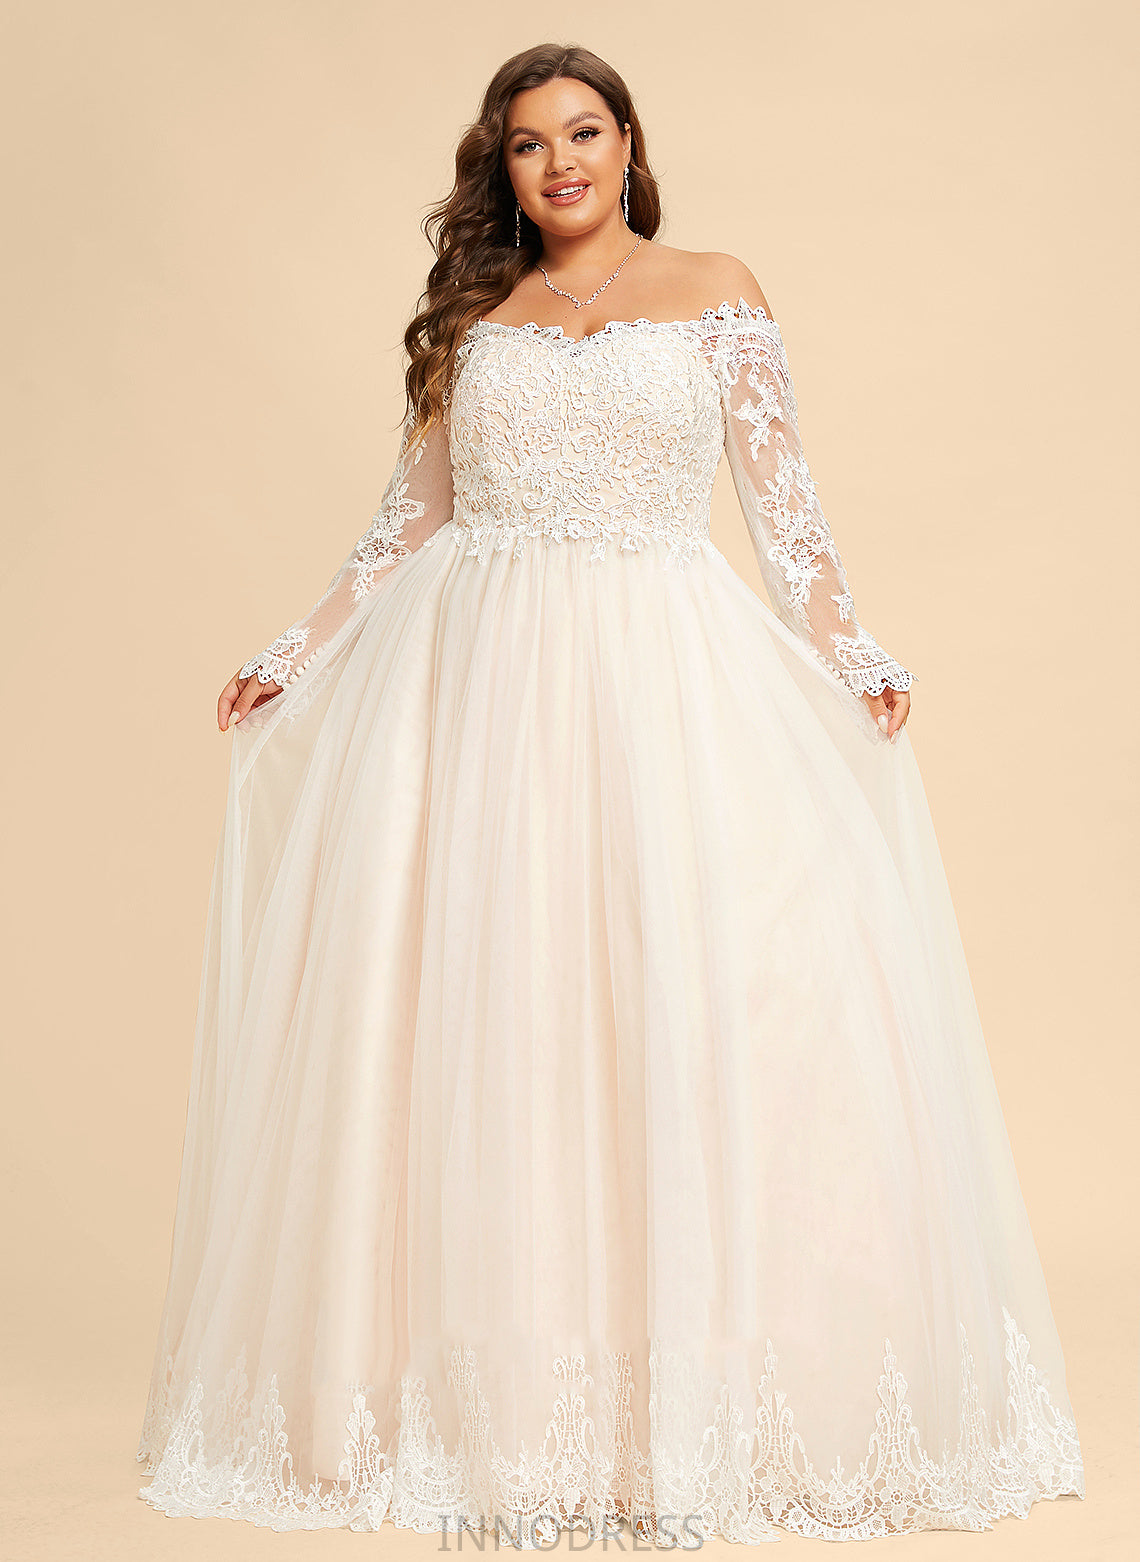 Tulle Lace Lana Wedding Dresses Off-the-Shoulder Train Ball-Gown/Princess Wedding Dress Chapel